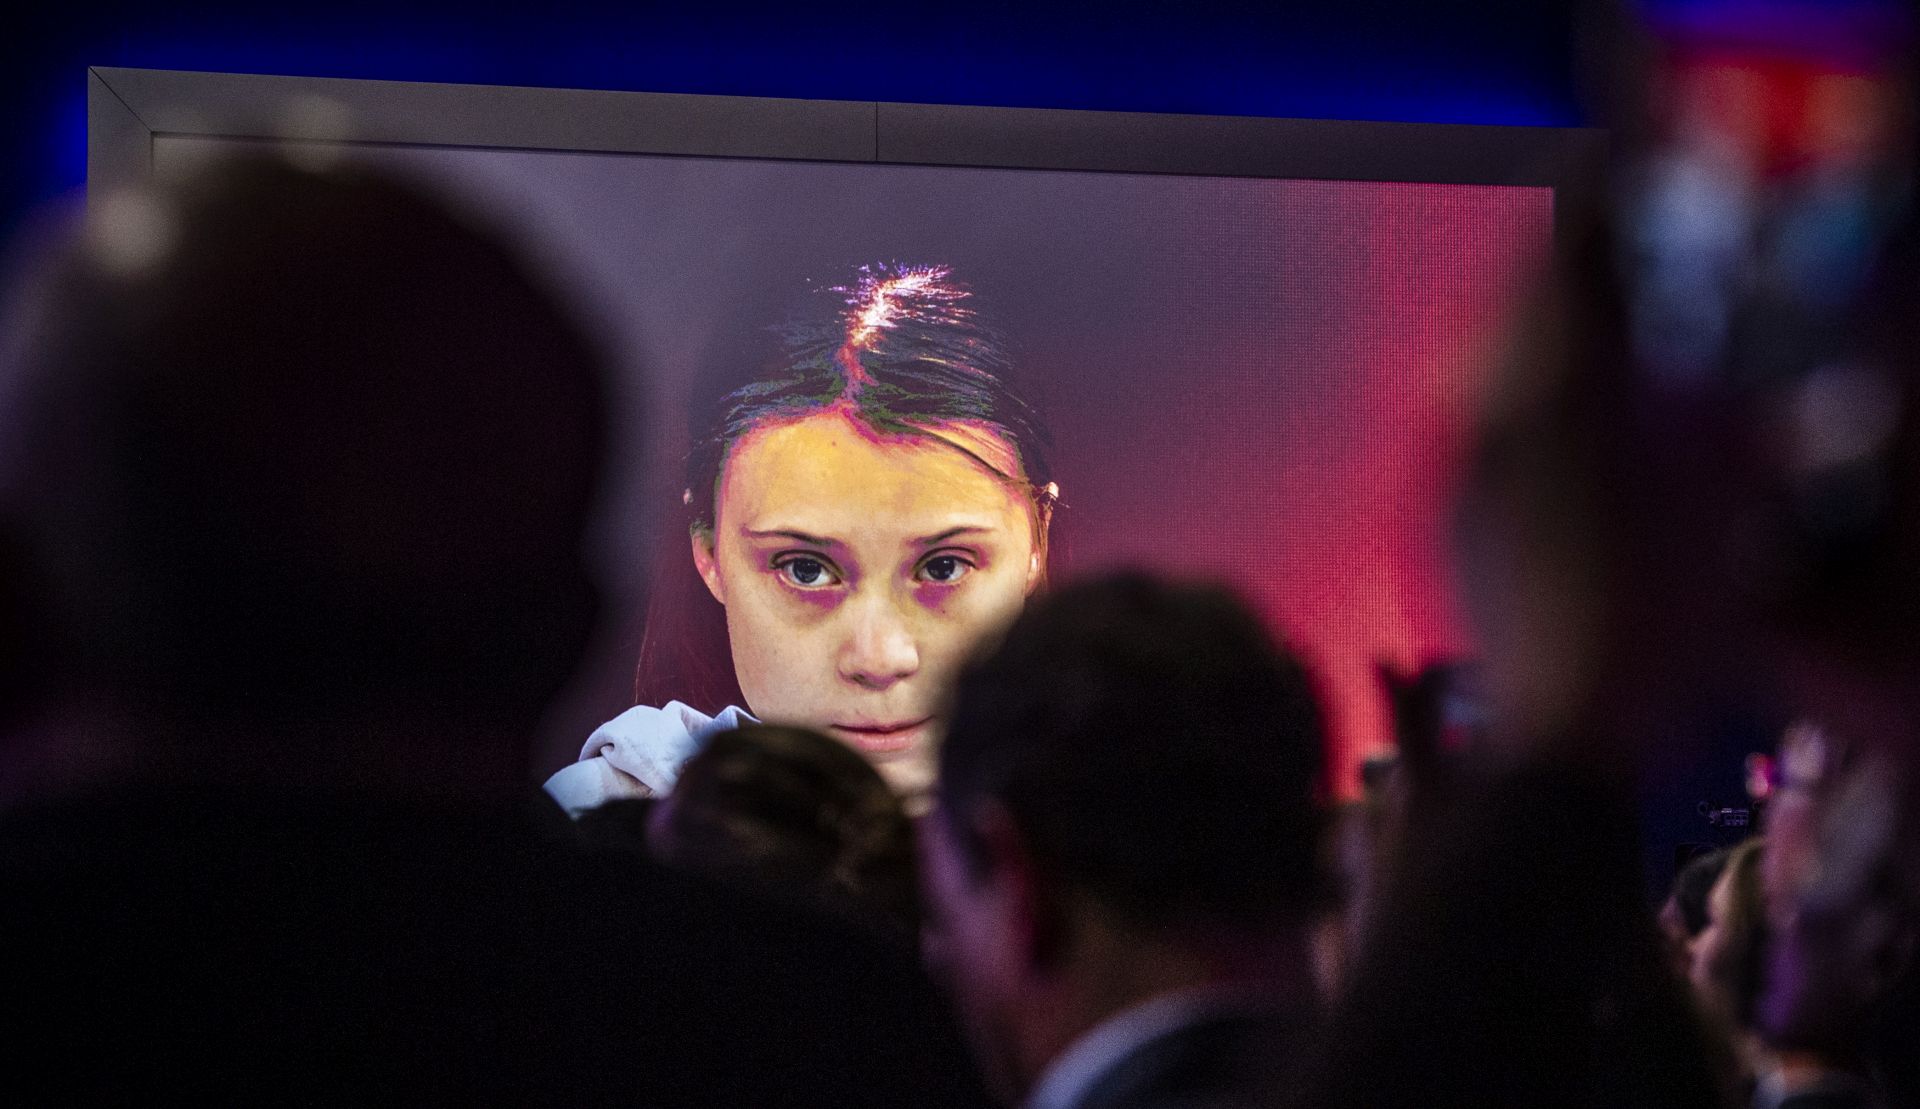 epa08146520 Swedish climate activist Greta Thunberg is displayed on a large screen as she attends a panel session during the 50th annual meeting of the World Economic Forum (WEF) in Davos, Switzerland, 21 January 2020. The meeting brings together entrepreneurs, scientists, corporate and political leaders in Davos under the topic 'Stakeholders for a Cohesive and Sustainable World' from 21 to 24 January 2020.  EPA/GIAN EHRENZELLER